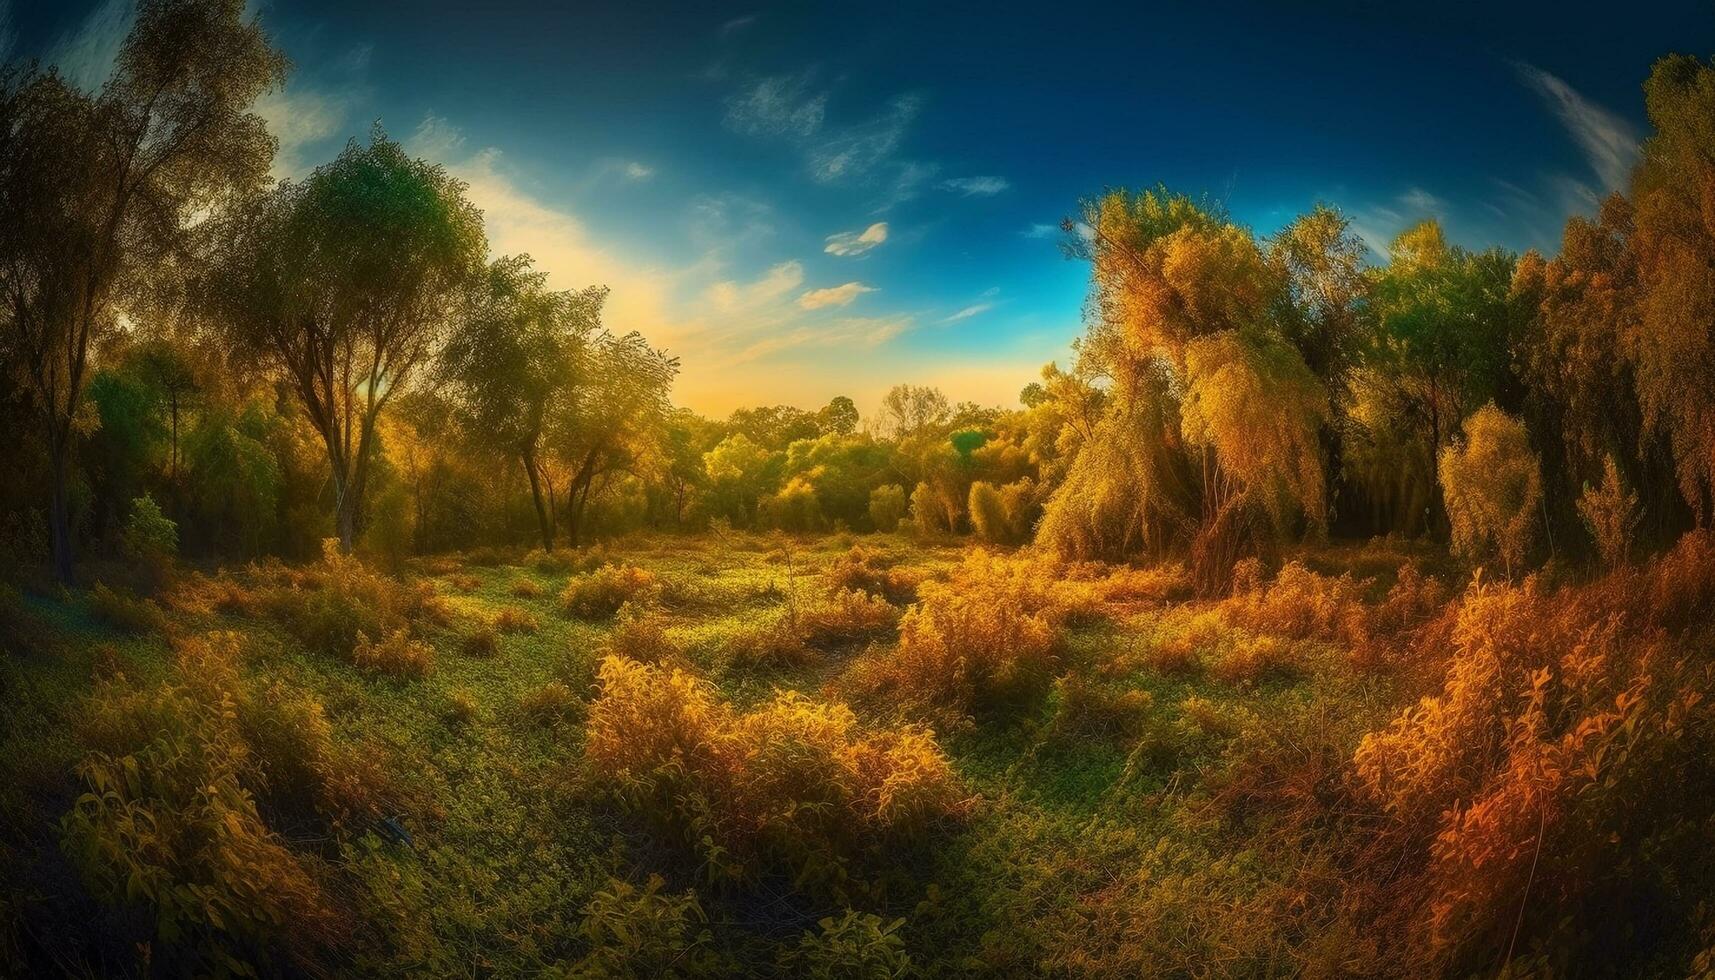 Golden sunlight illuminates tranquil forest meadow scene generated by AI photo